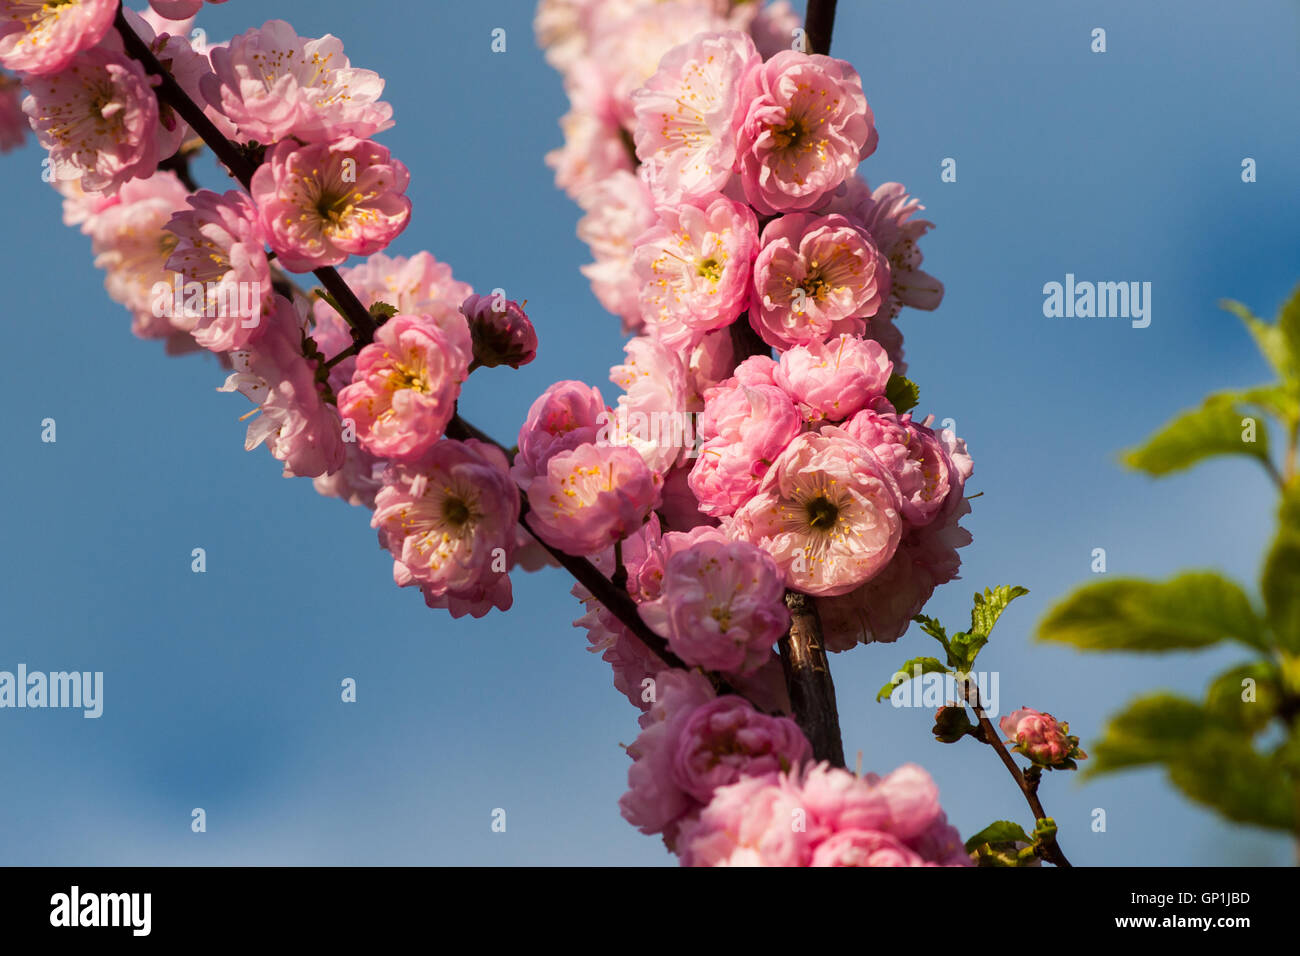 Prunus triloba or flowering plum flowers against the background of blue sky. Spring theme. Stock Photo